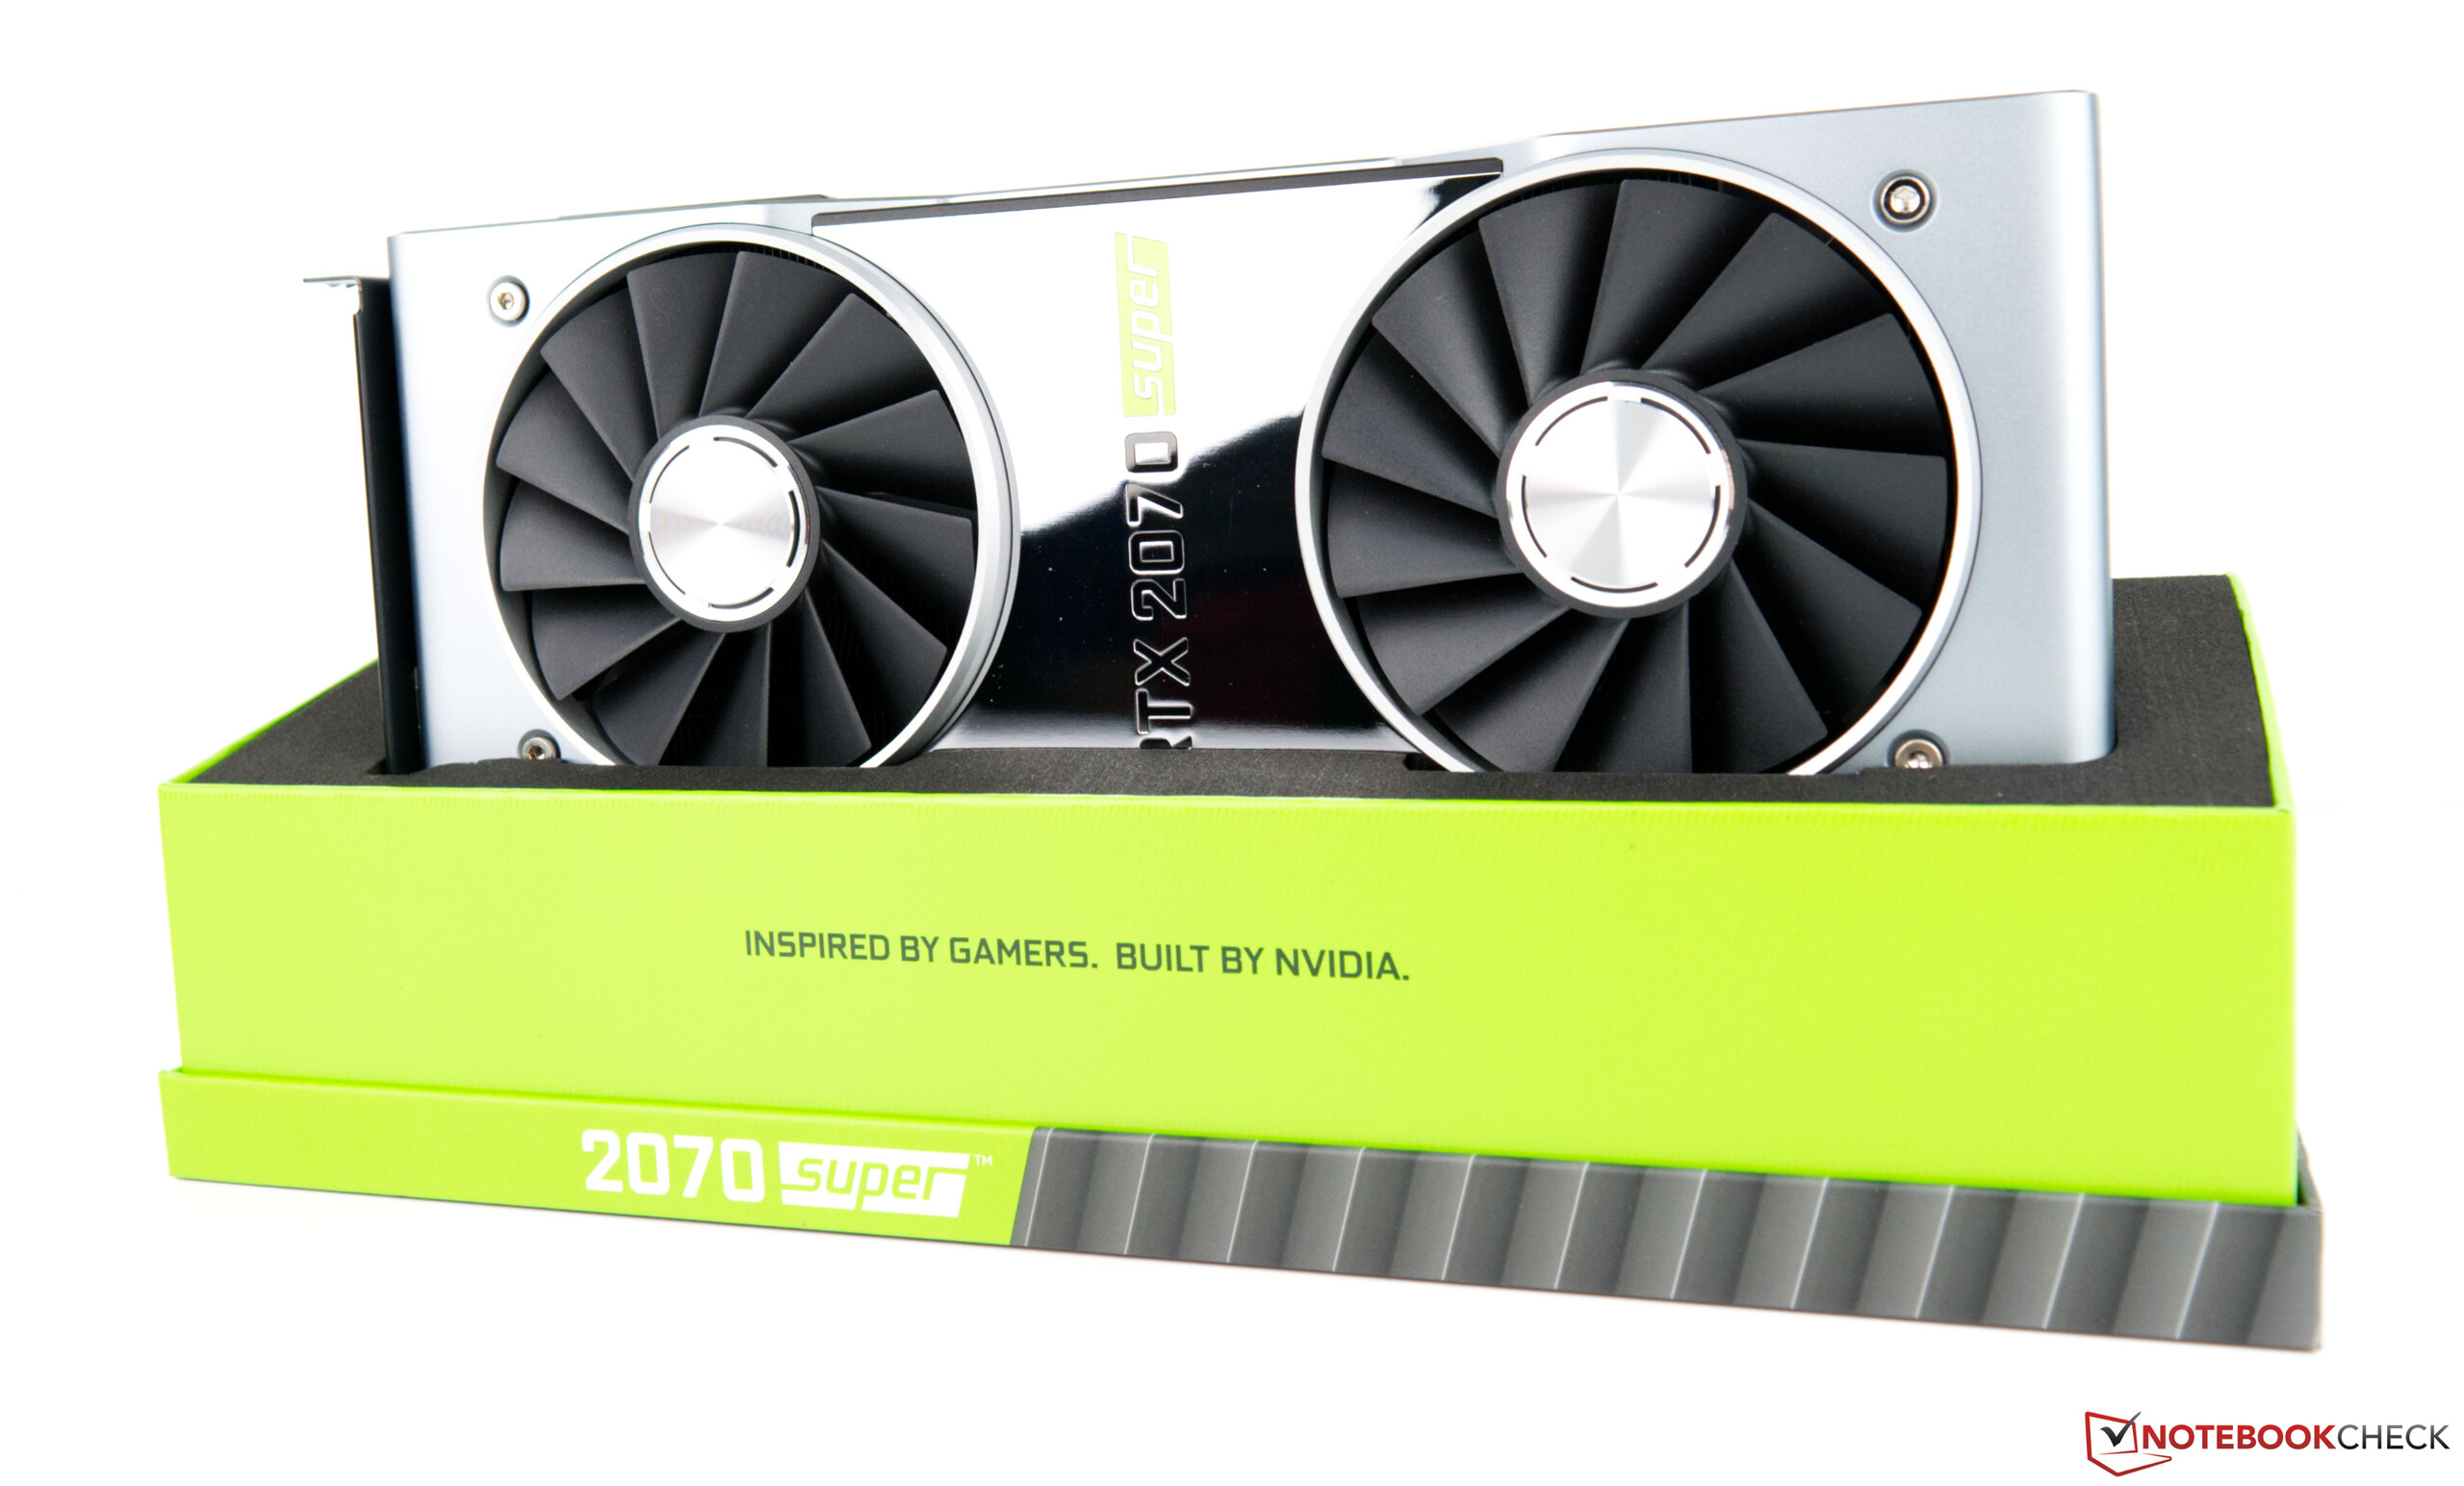 NVIDIA GeForce RTX 2070 SUPER Desktop GPU Review: In touching distance of the GeForce RTX 2080 - NotebookCheck.net